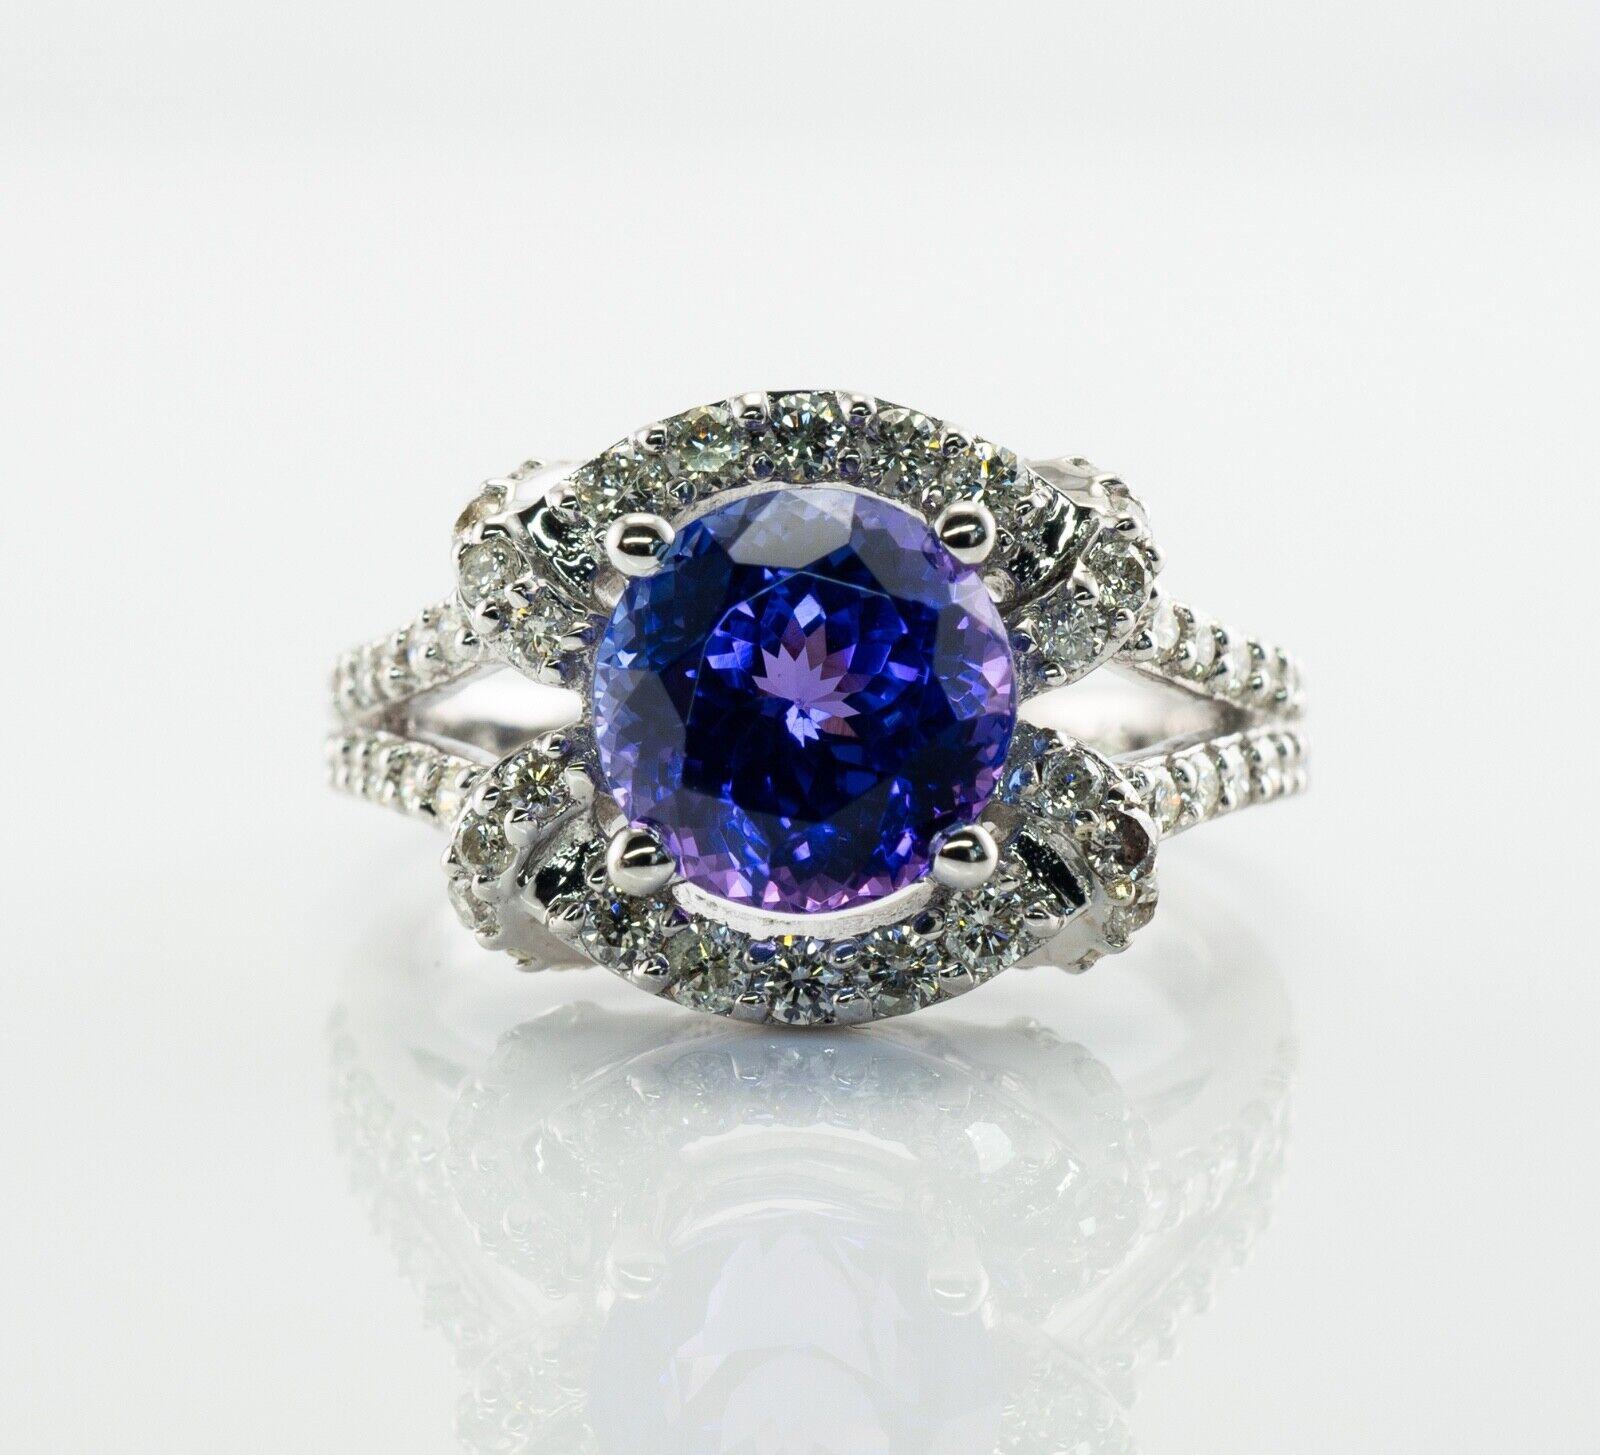 This gorgeous estate ring is finely crafted in solid 18K White gold and set with genuine Earth mined Tanzanite and Diamonds. It is also hallmarked 